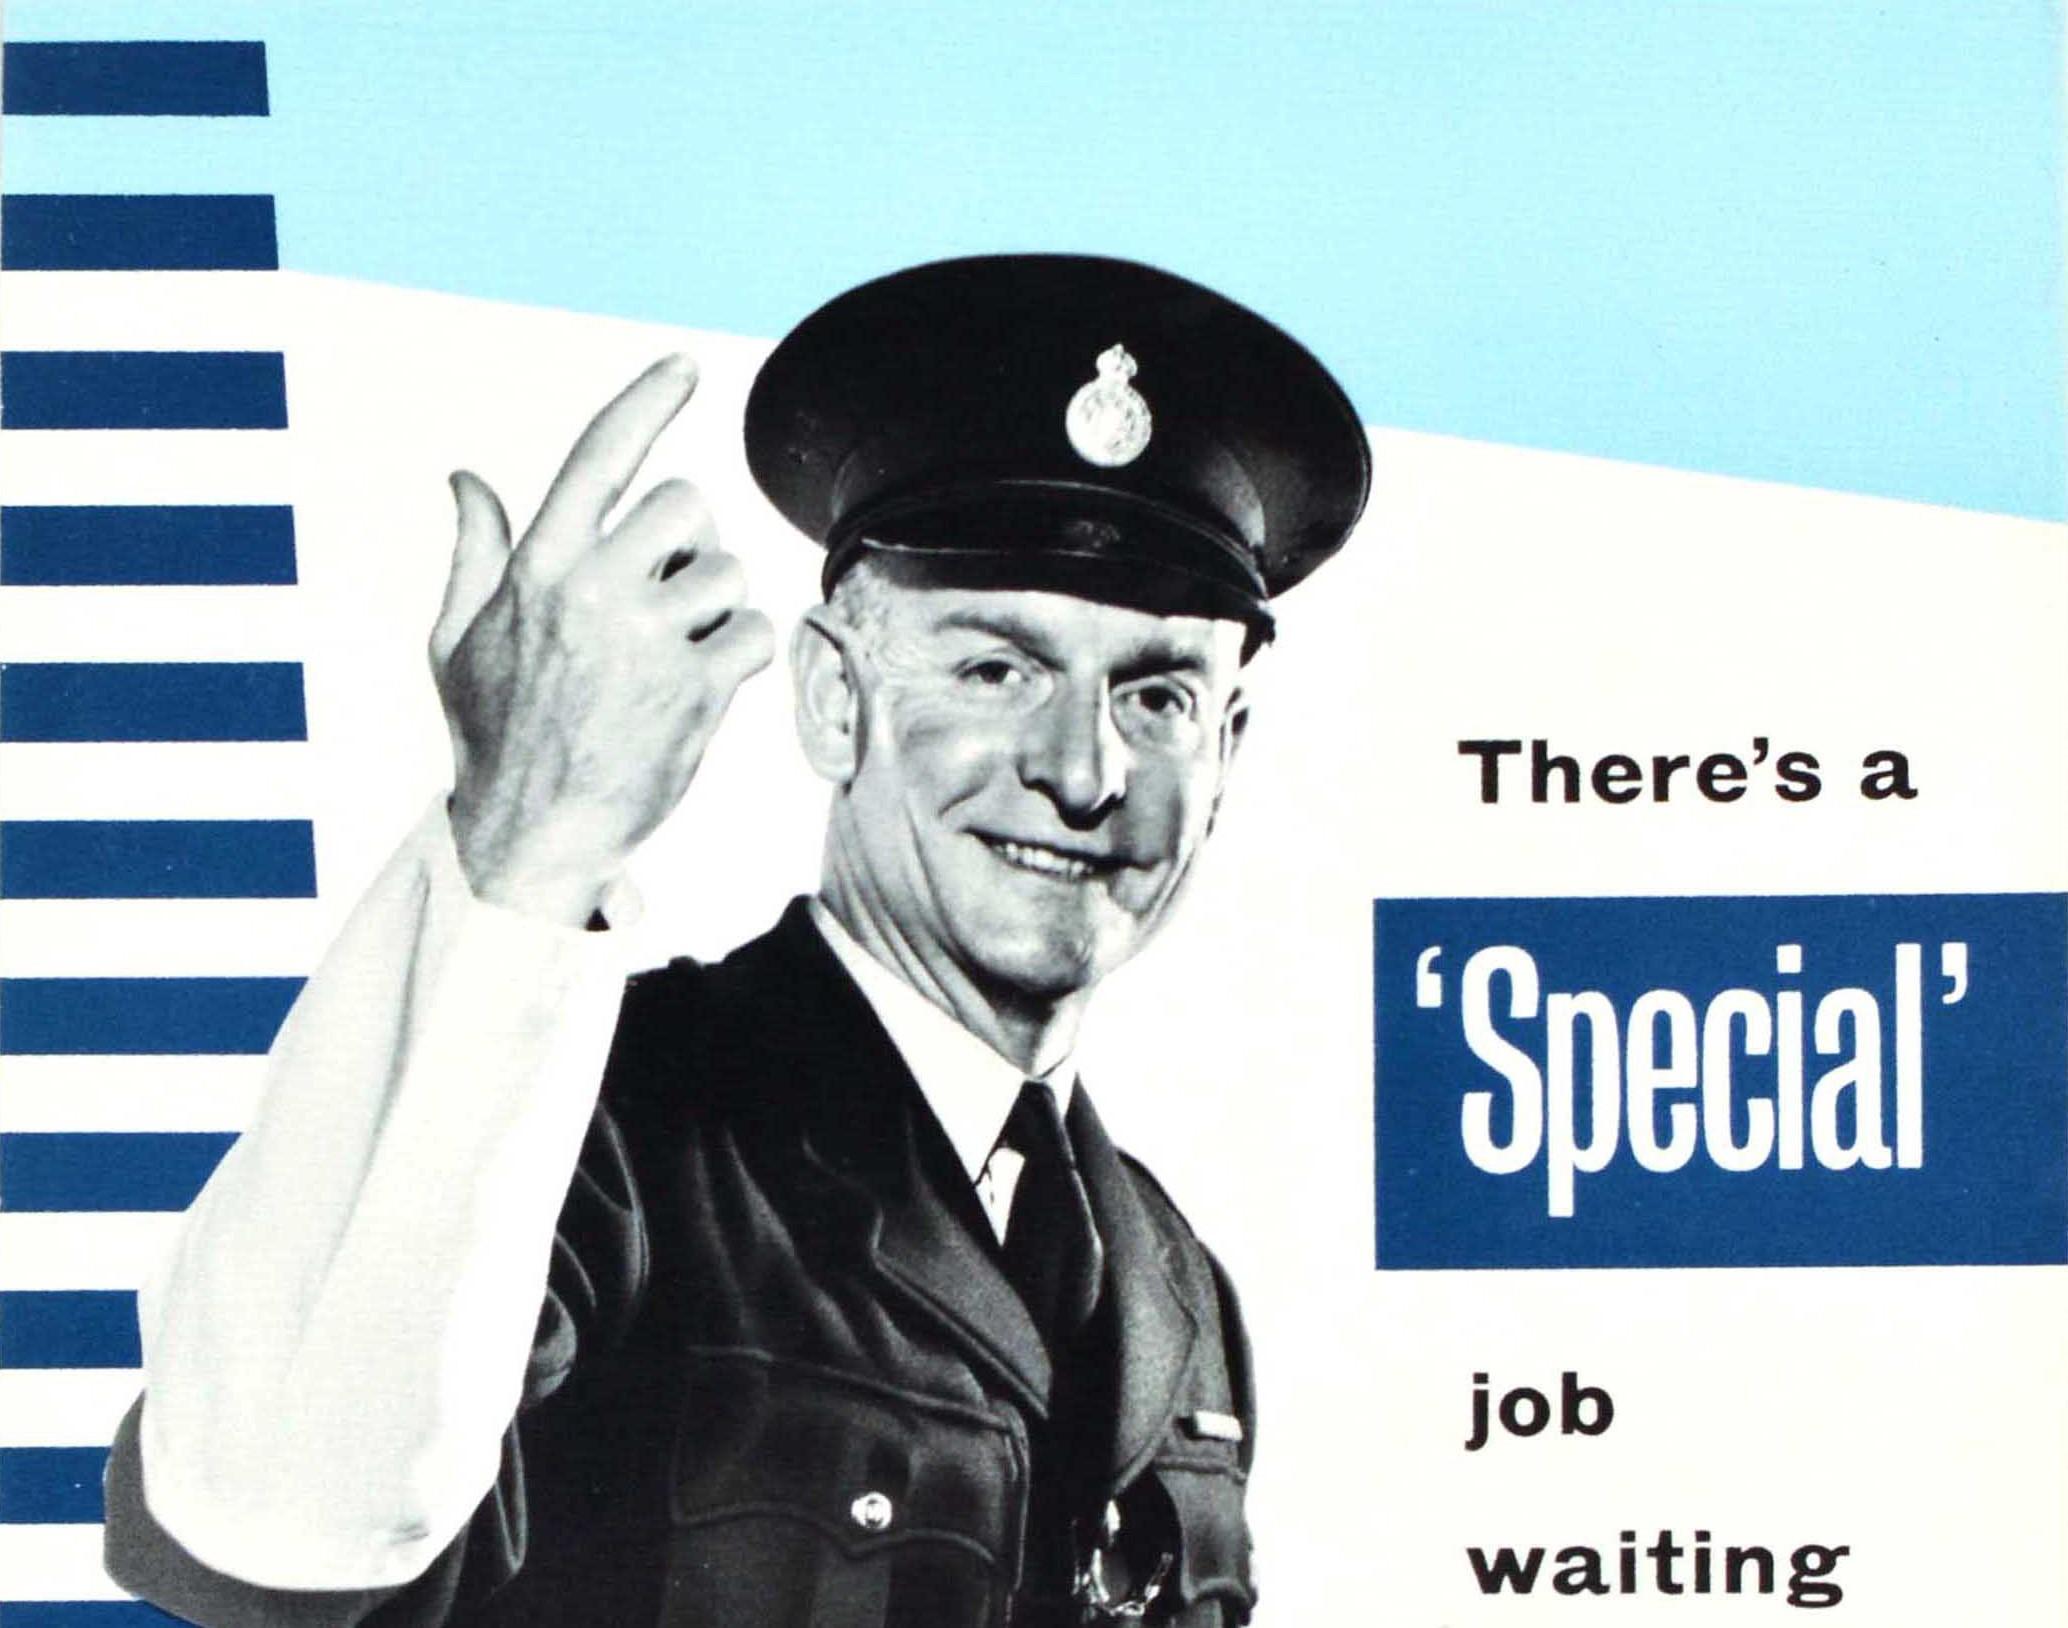 Original Vintage Poster A Special Job Waiting For You Constabulary Police Force - Print by Unknown